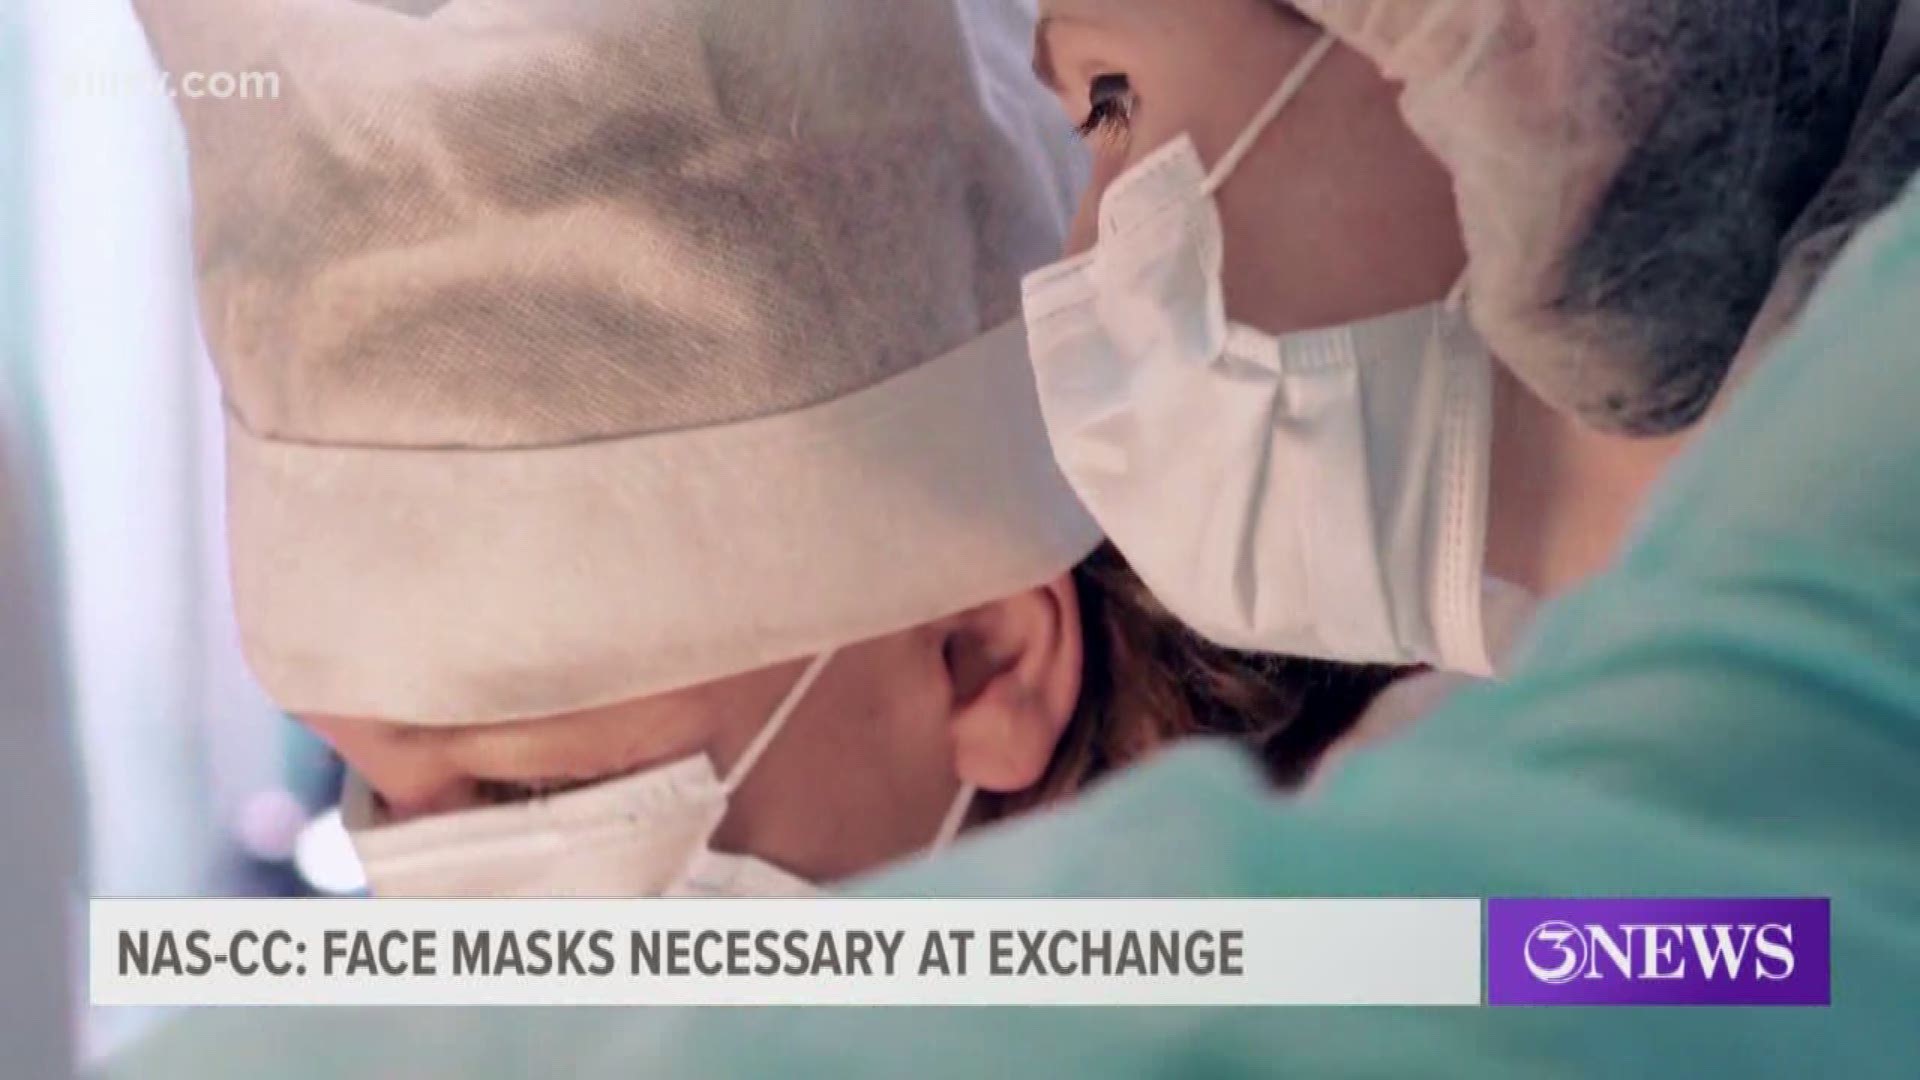 According to base officials, anyone shopping at the navy exchange must wear a face mask before entering the store.